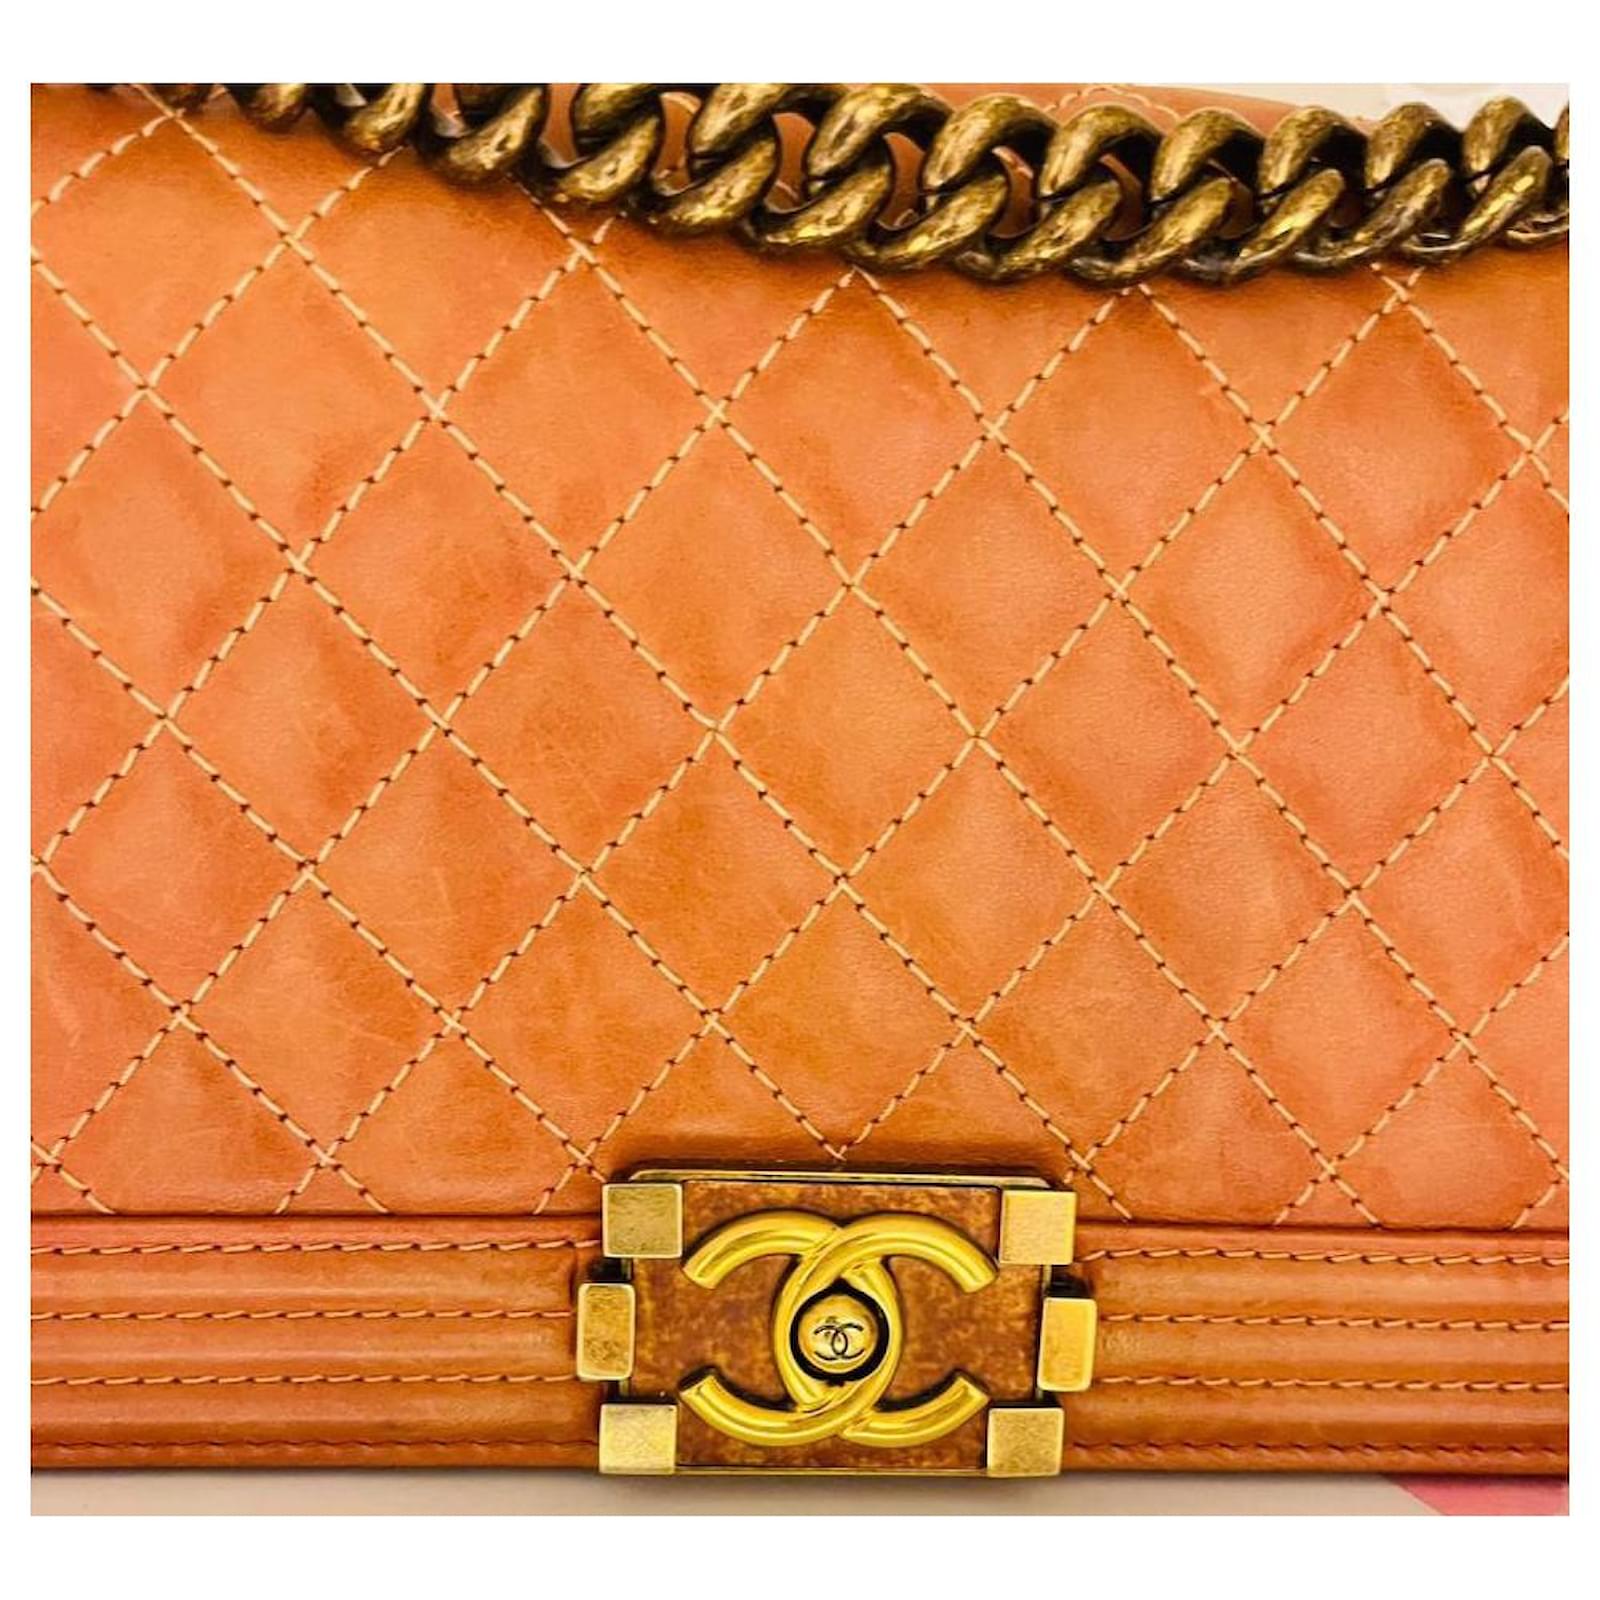 New $22, 000 Limited Edition Chanel Hand Beaded Jewel Bag at 1stDibs